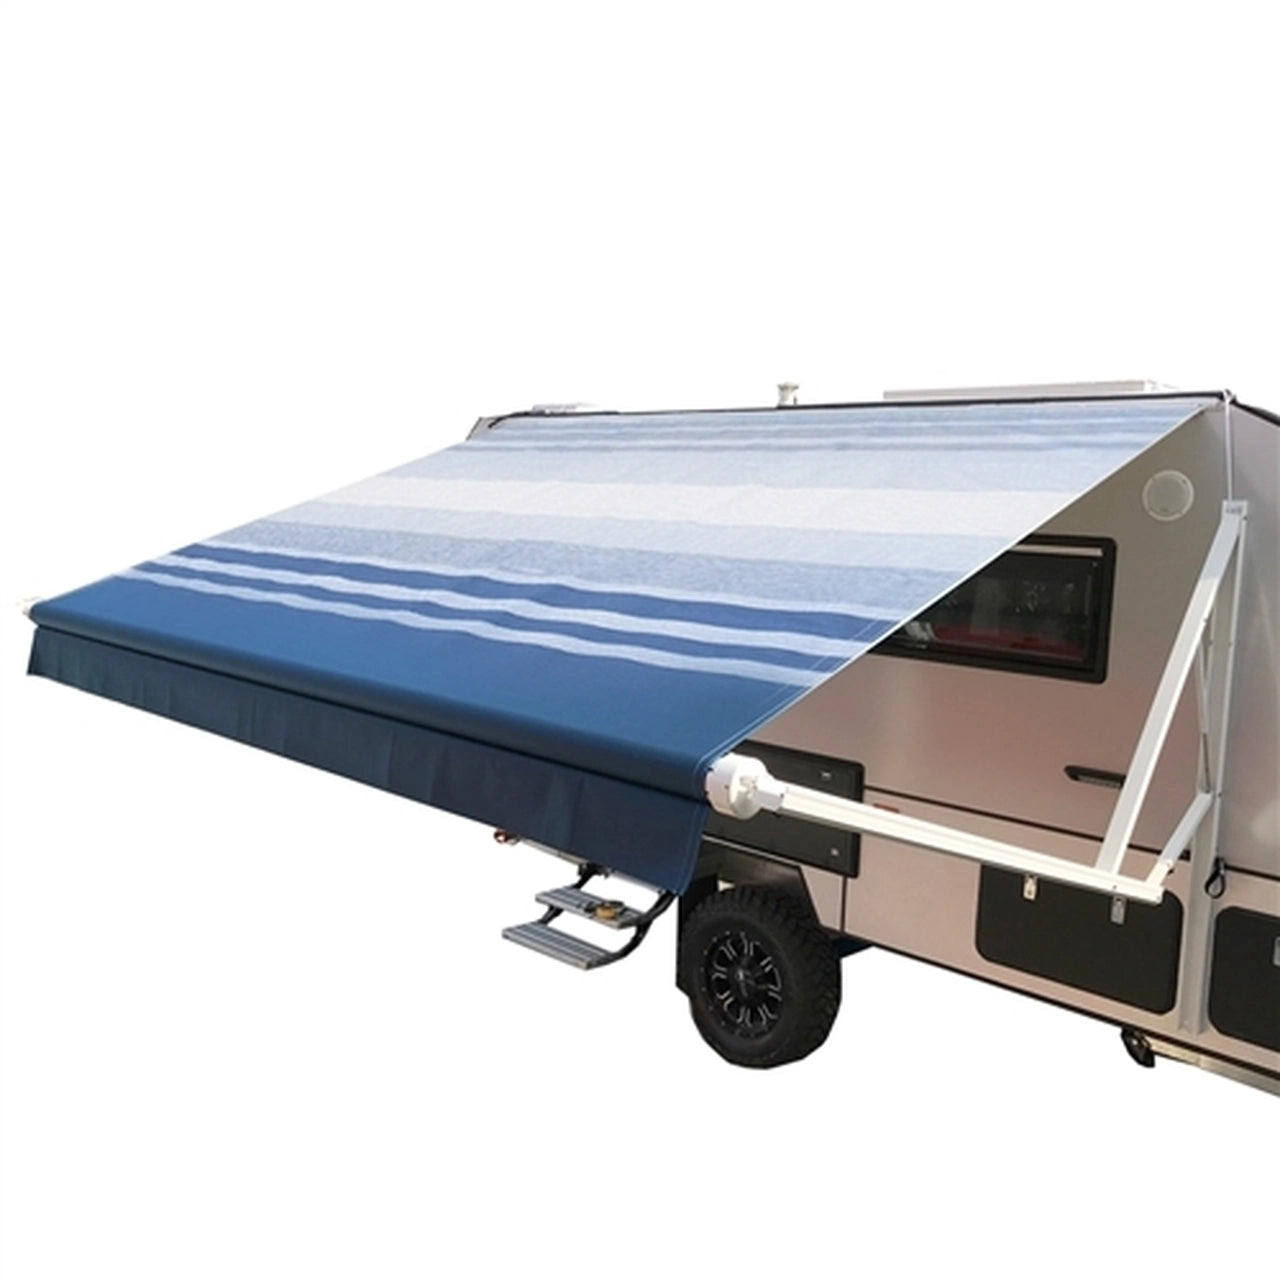 Aleko RV Awning Fabric Replacement - 15 X 8 ft (4.5 X 2.4 m)